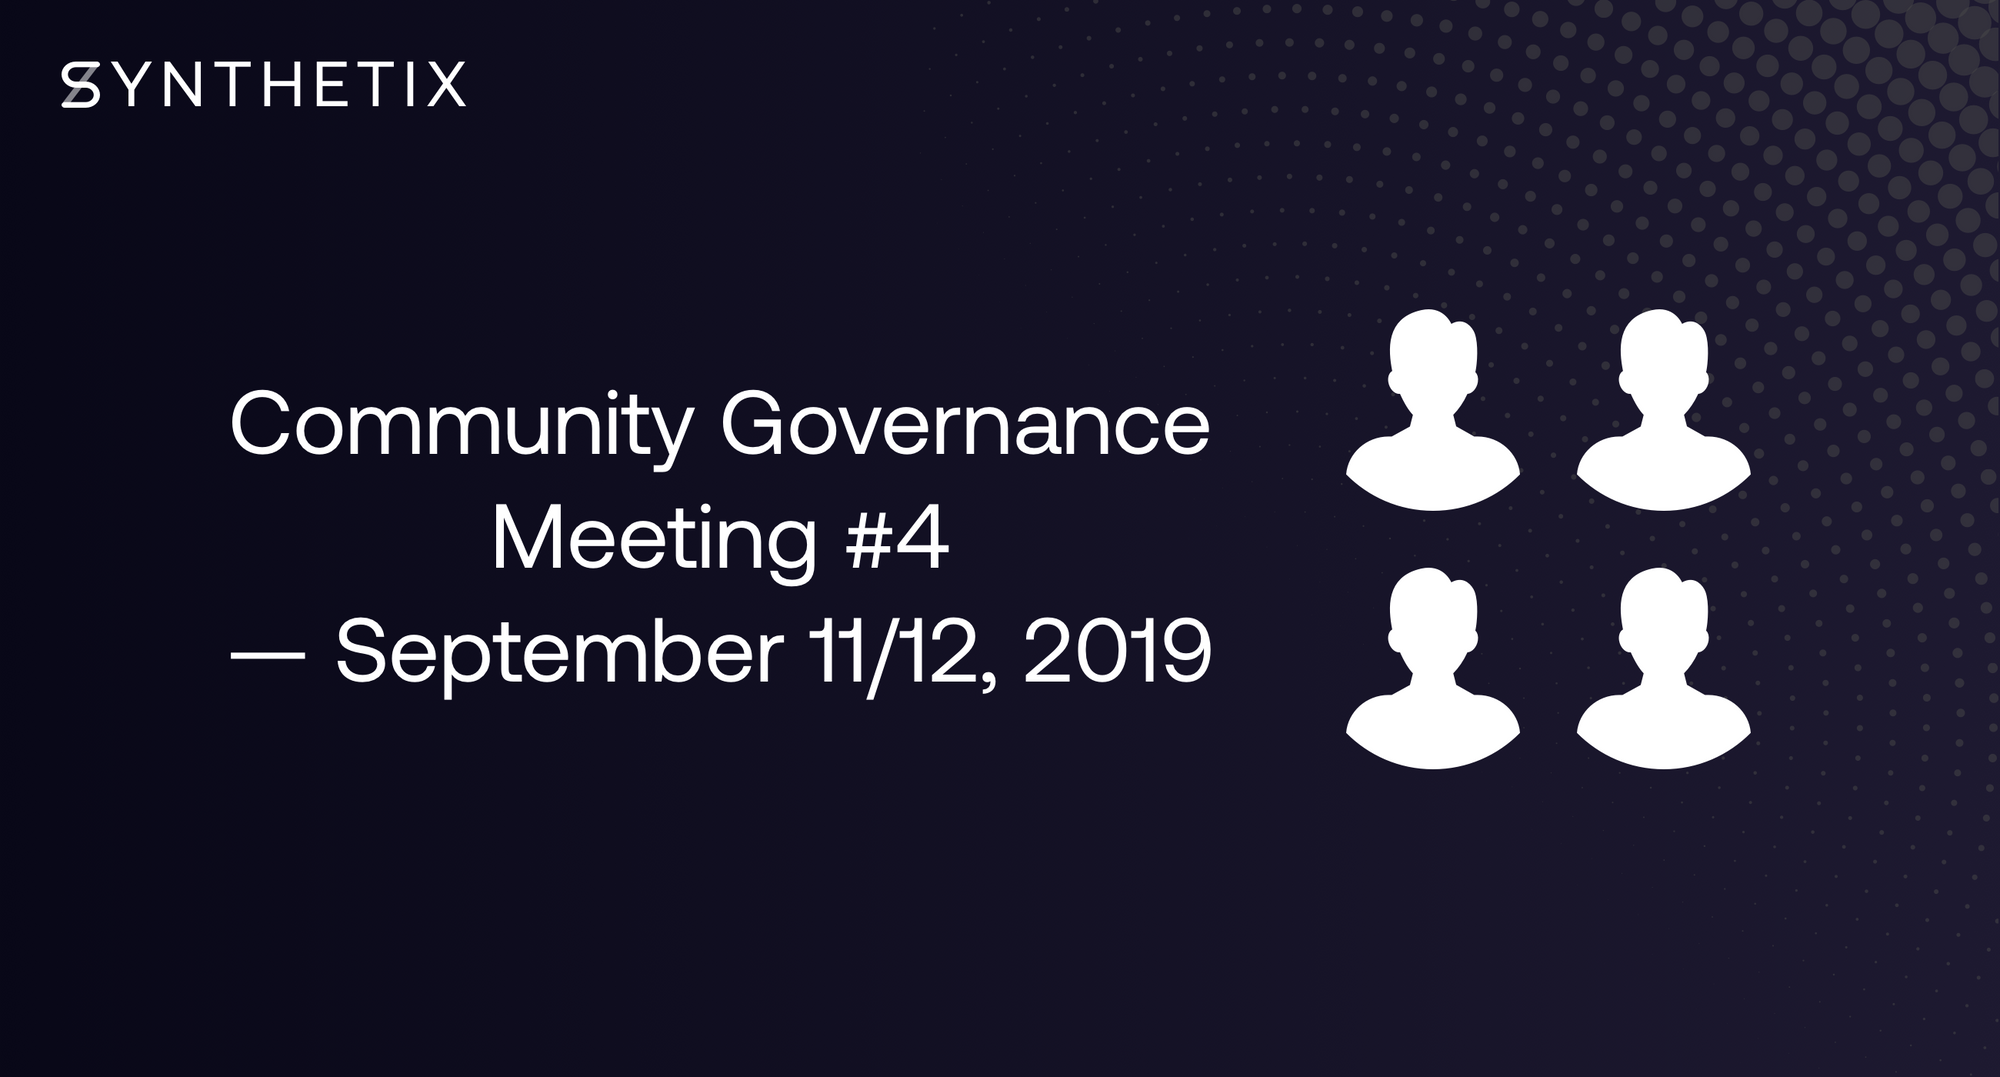 Join us in the next community governance call on September 11/12!